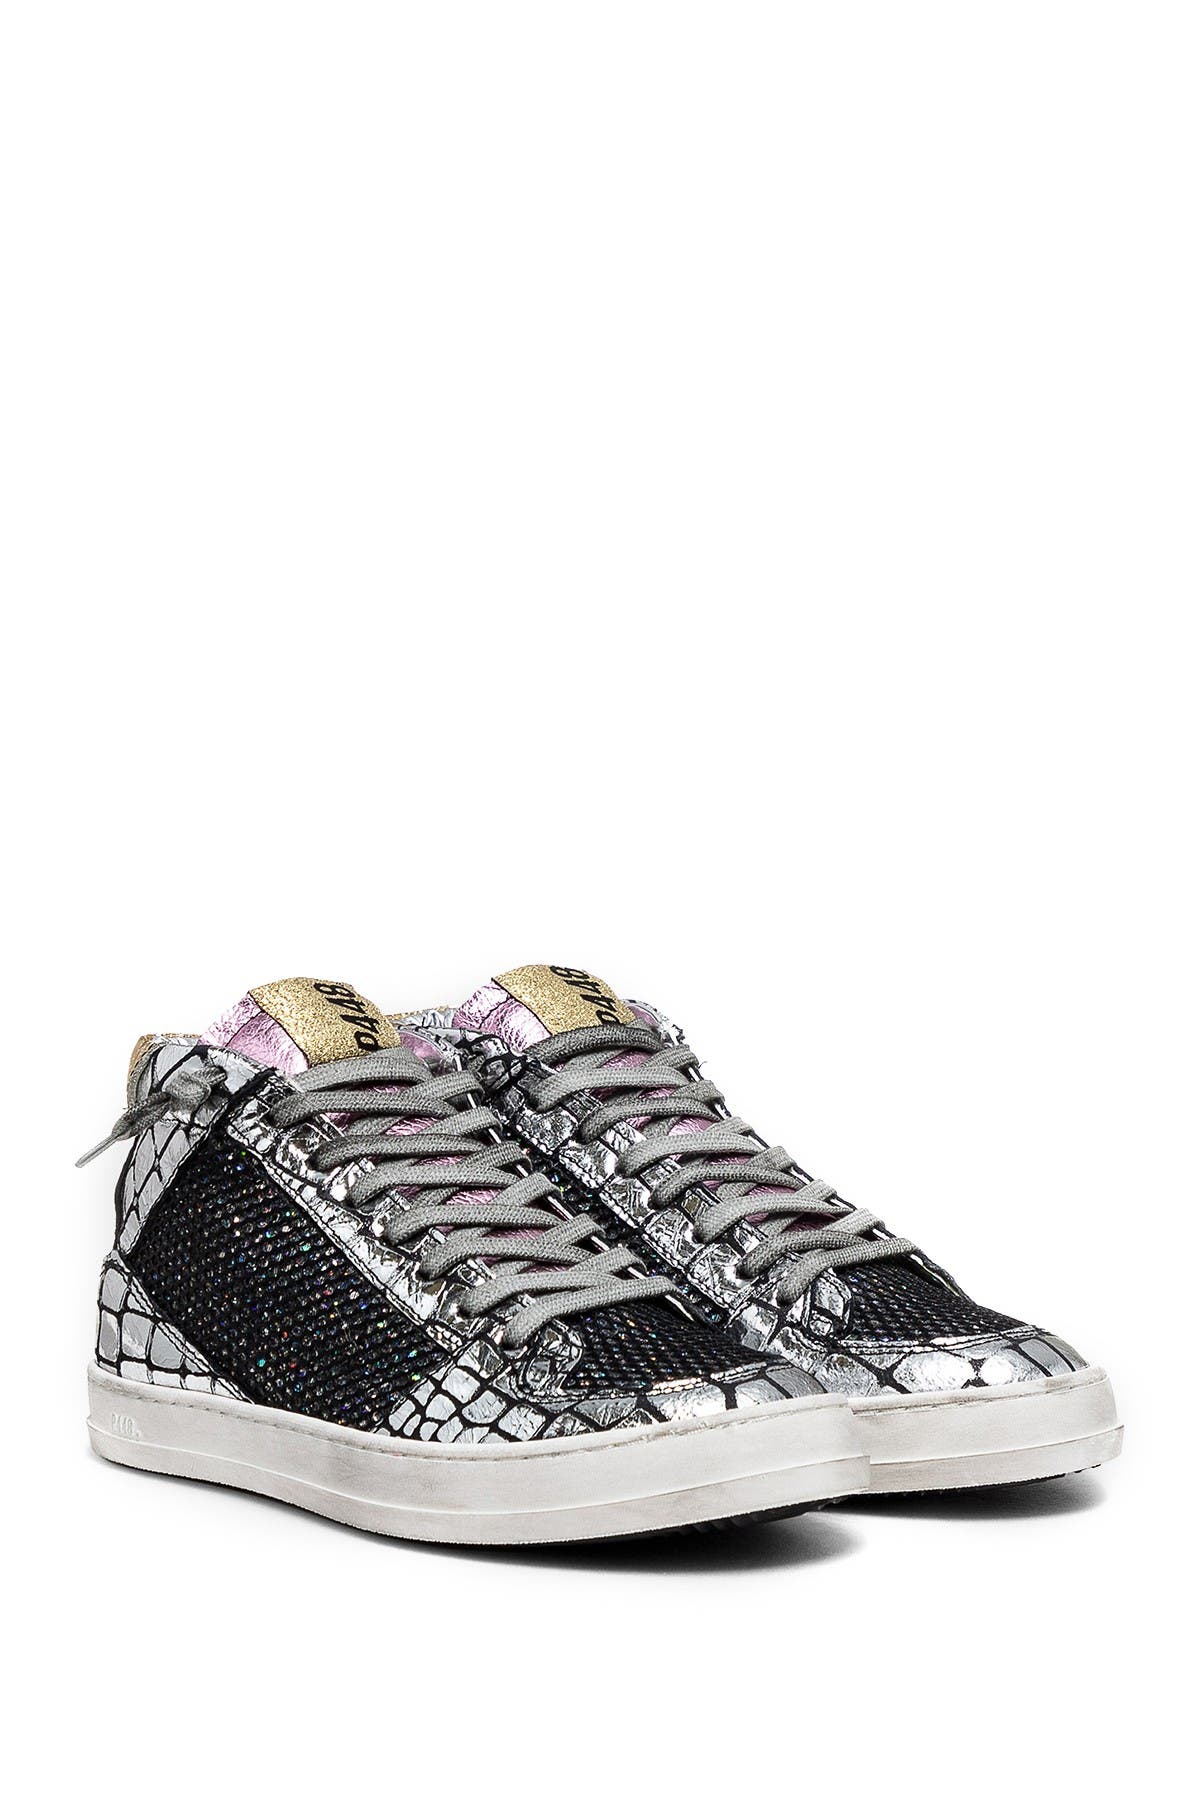 P448 | Queens Printed Leather Mid 